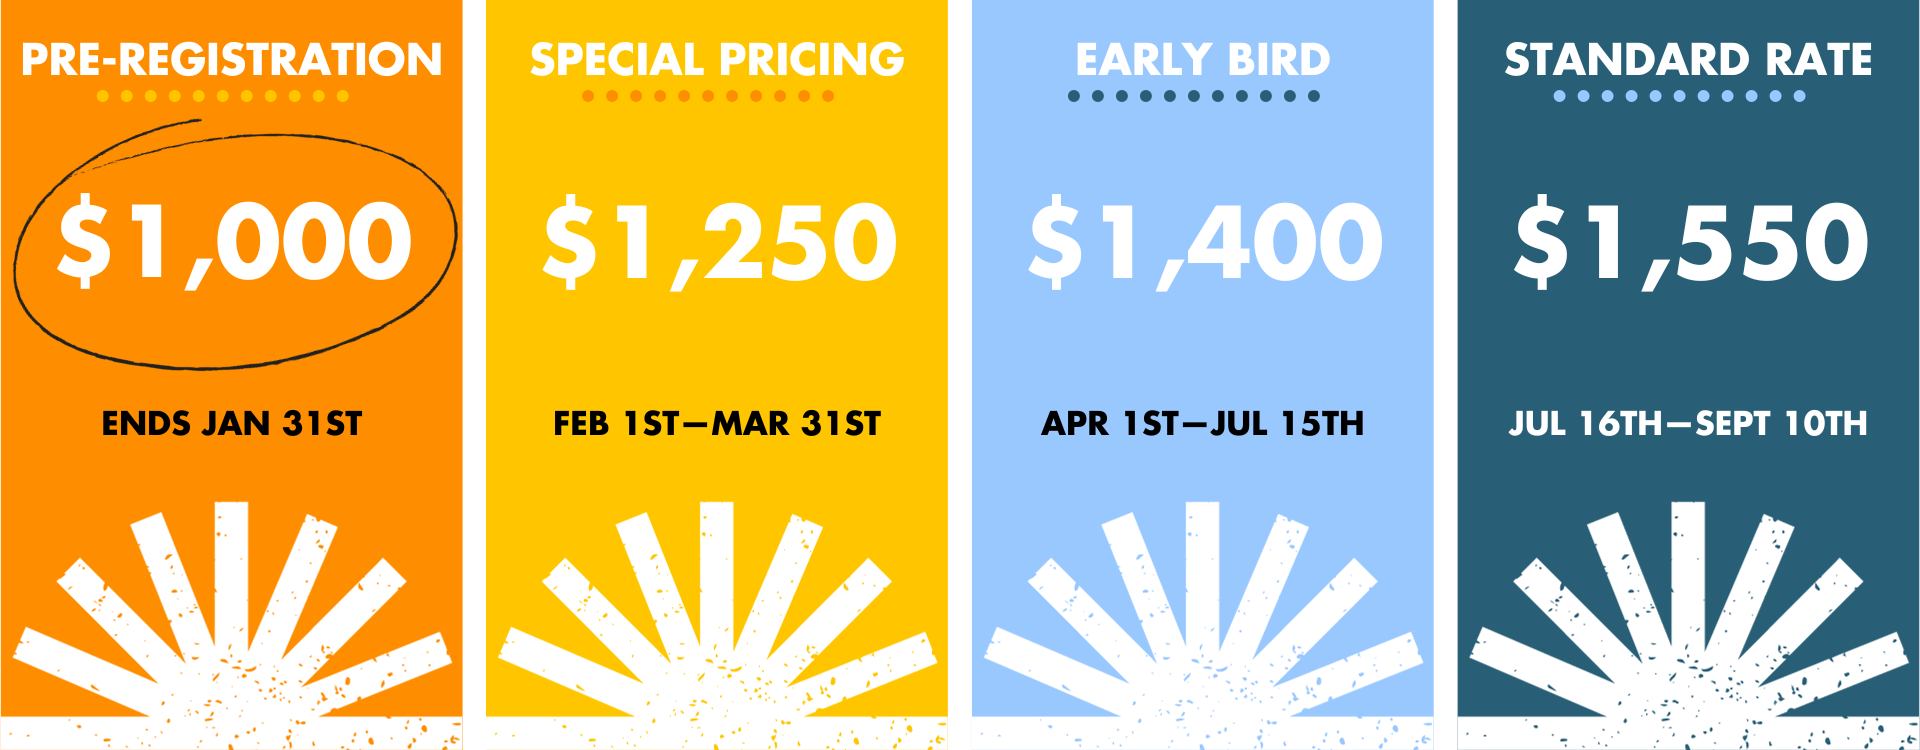 Pricing Schedule